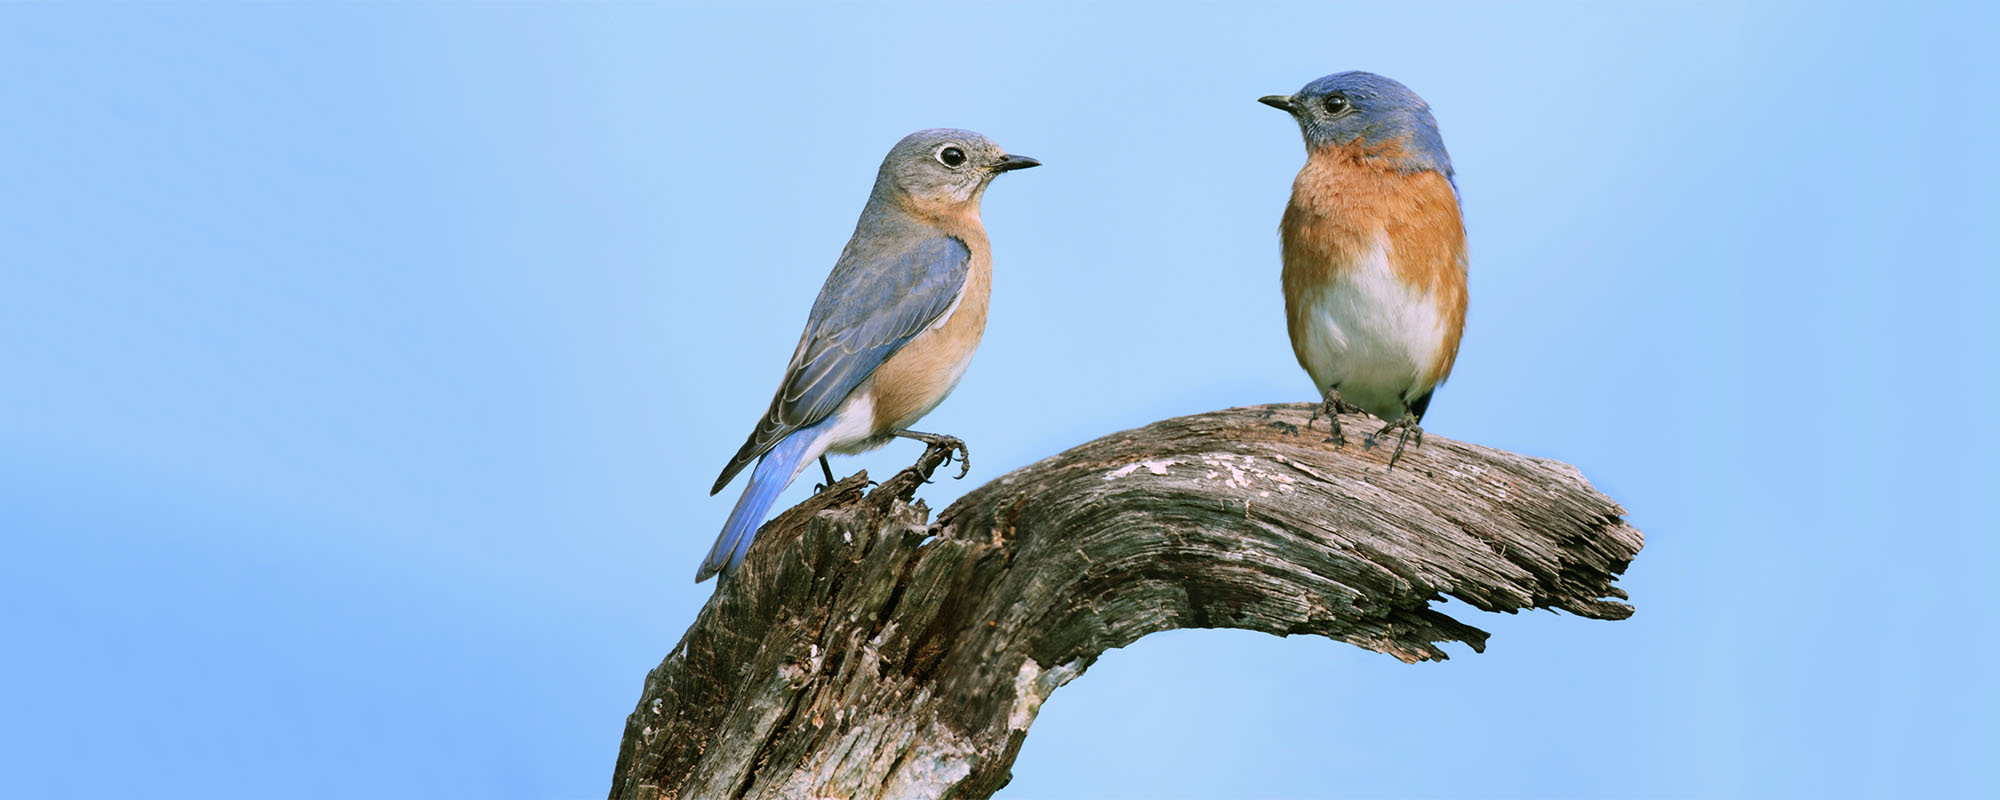 Two bluebirds resting on a tree branch